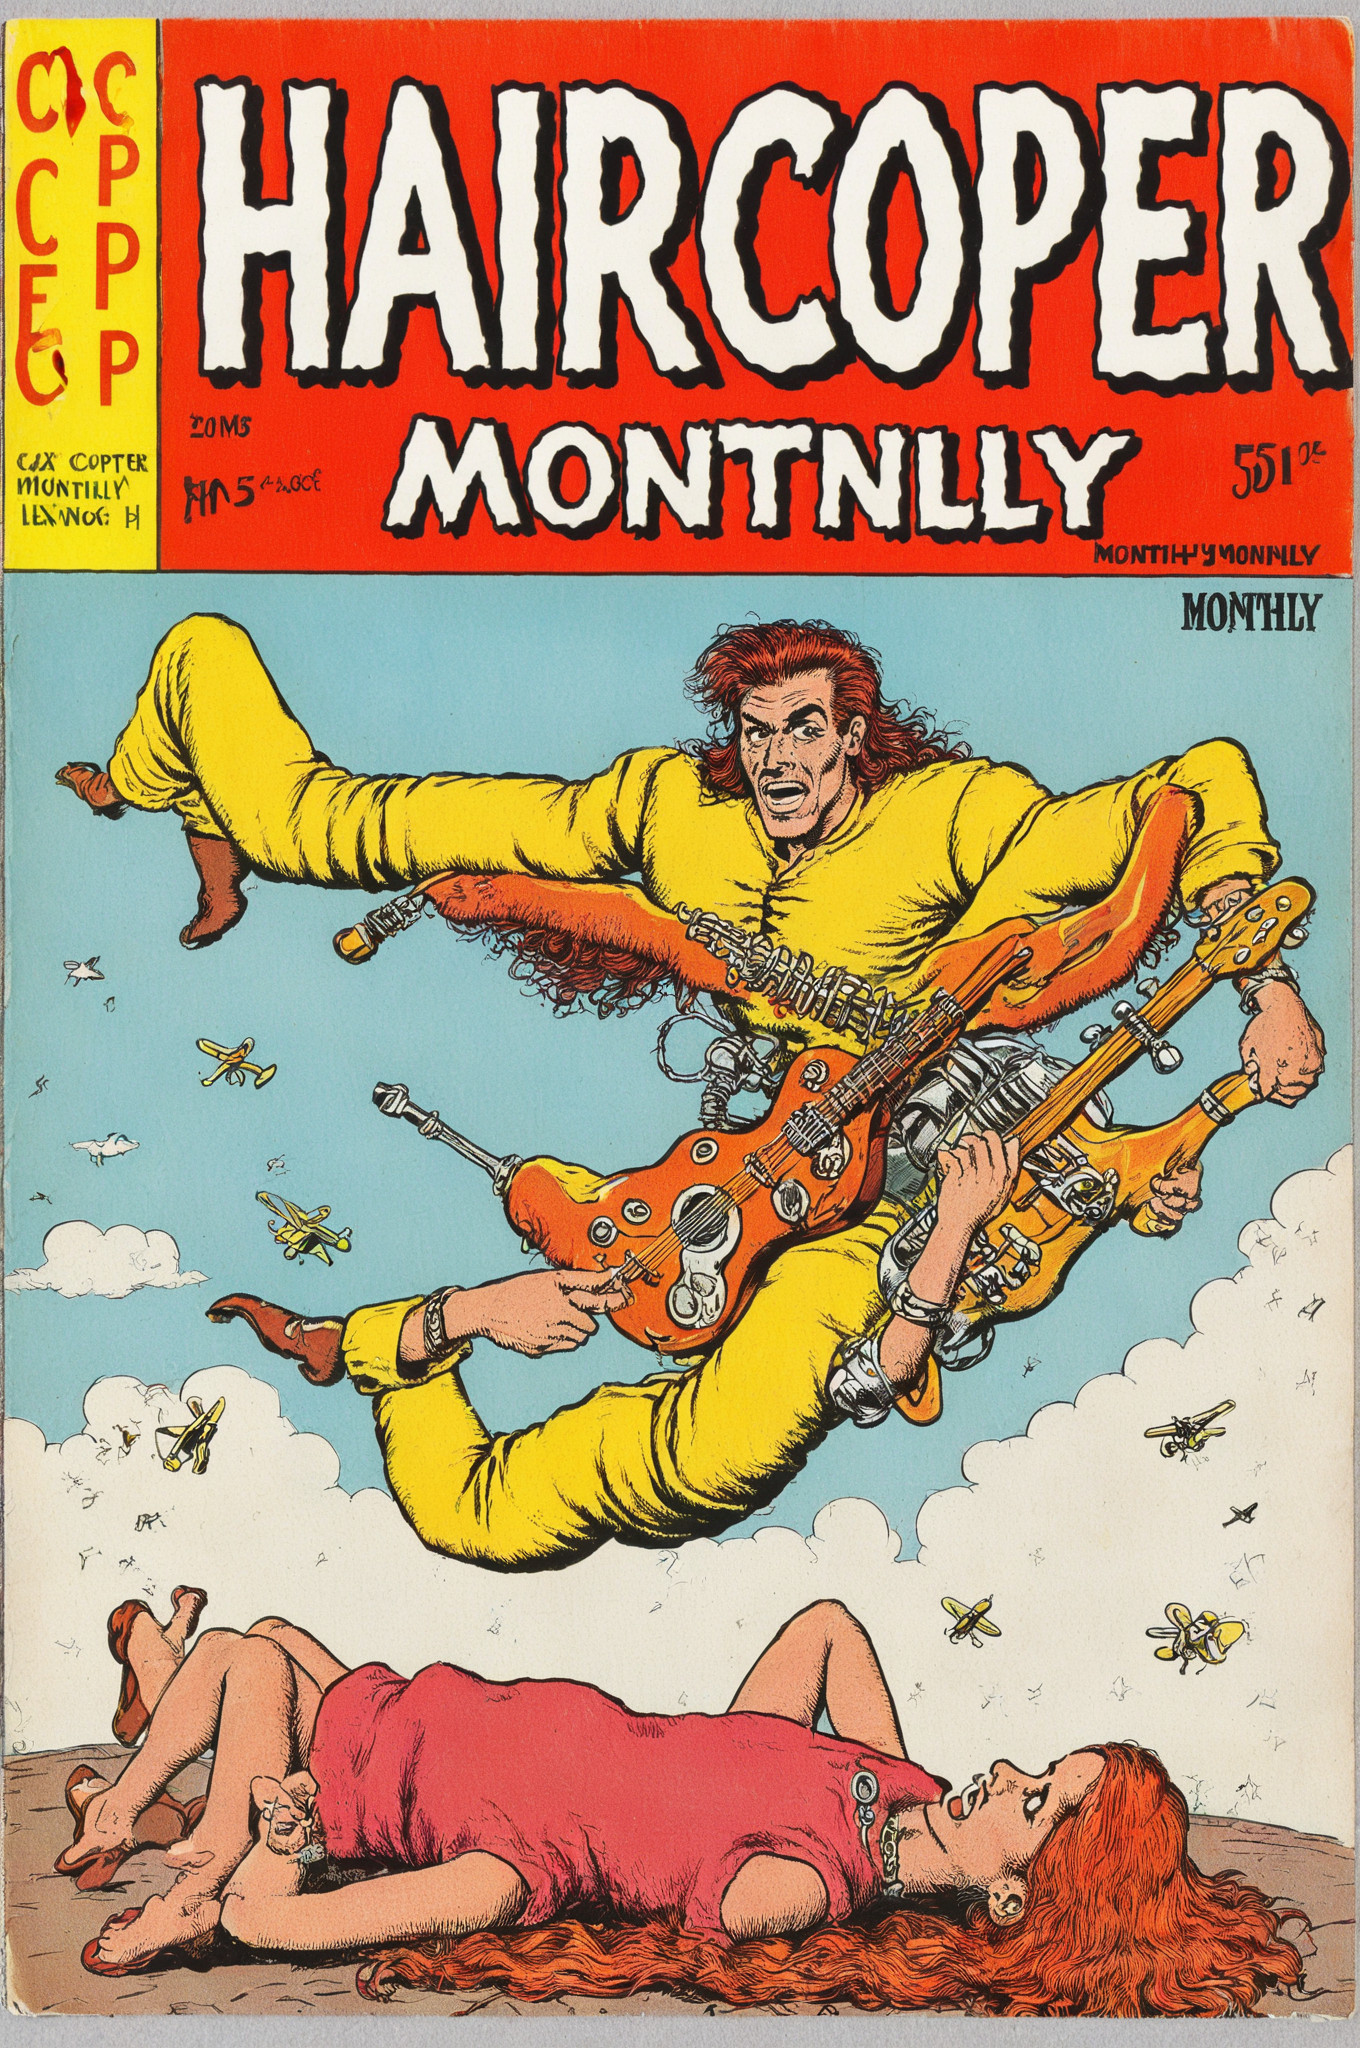 haircopter monthly, no. 551 "expert sitar production techniques"